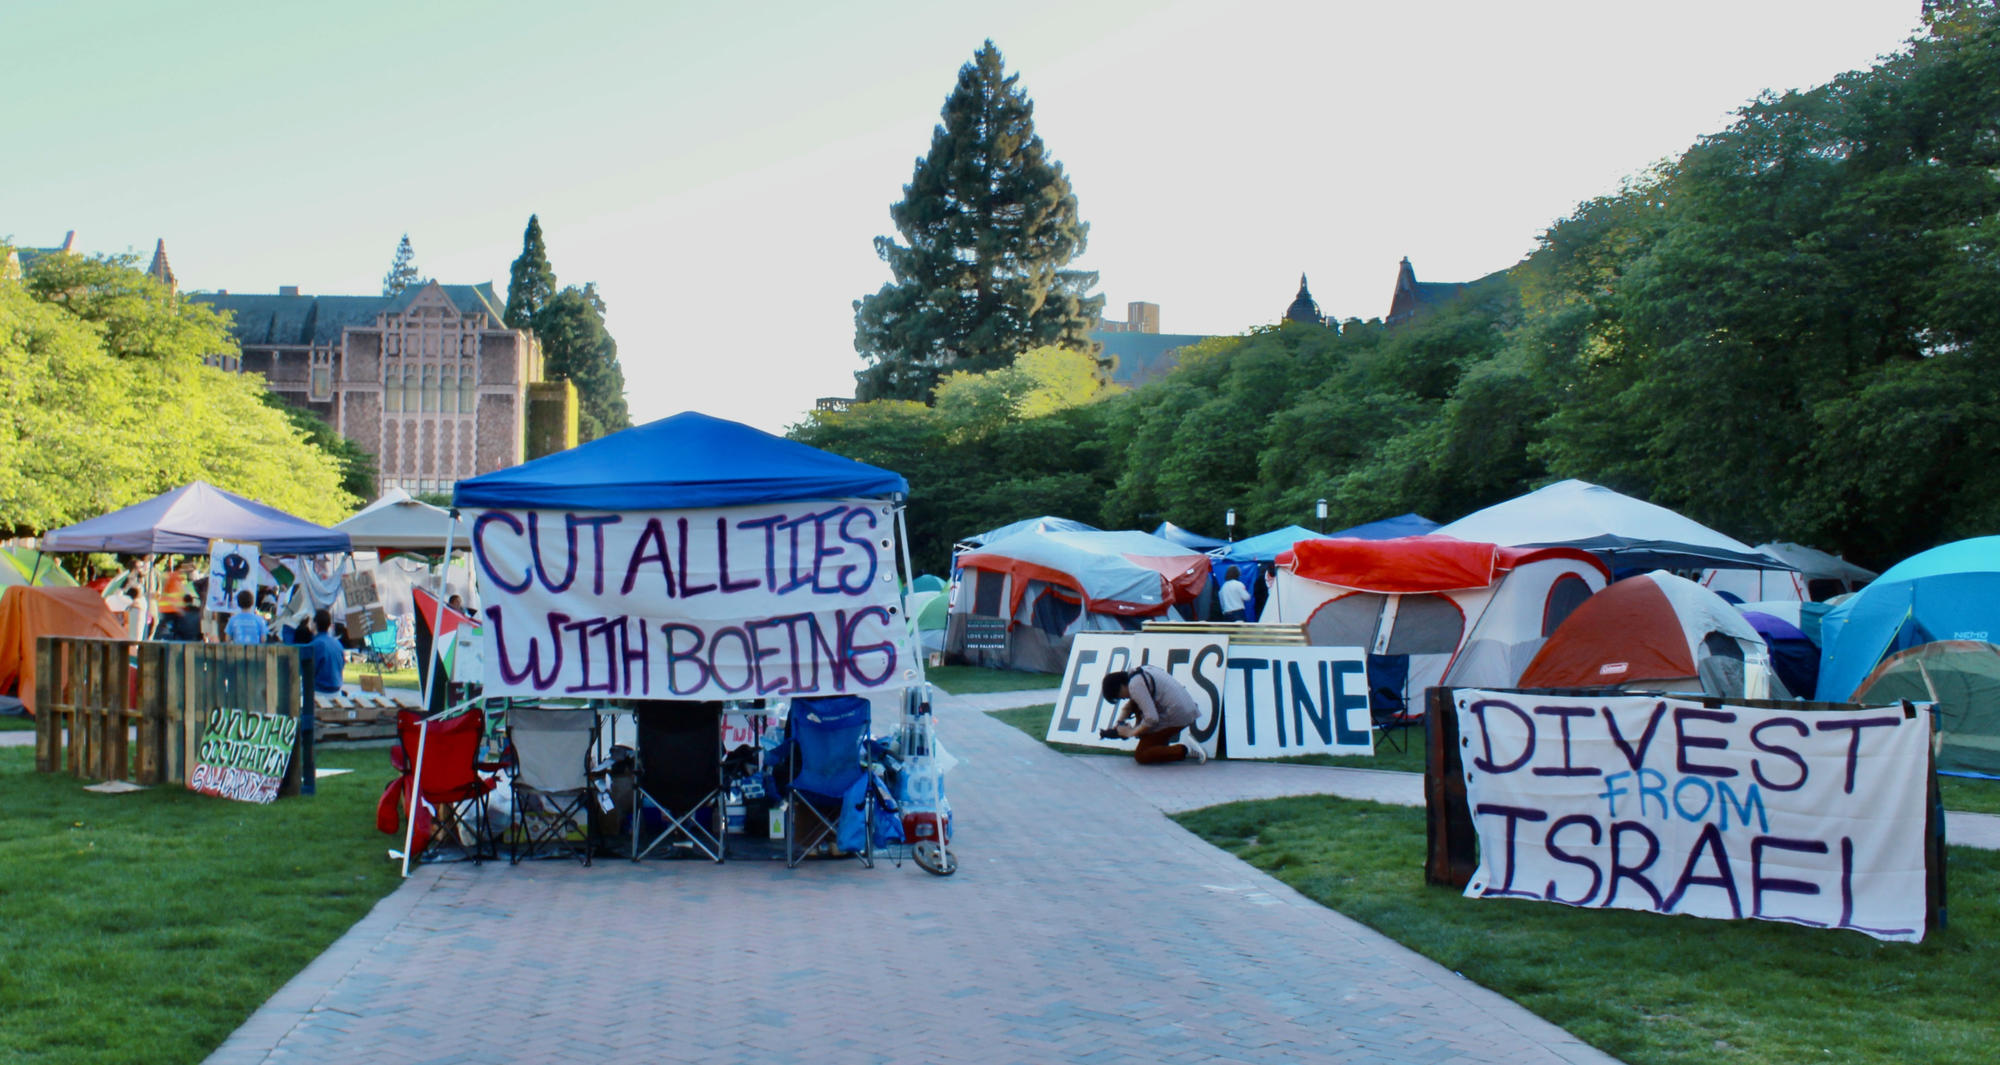 The encampment in support of Gaza at the University of Washington had grown to more than 100 protesters 